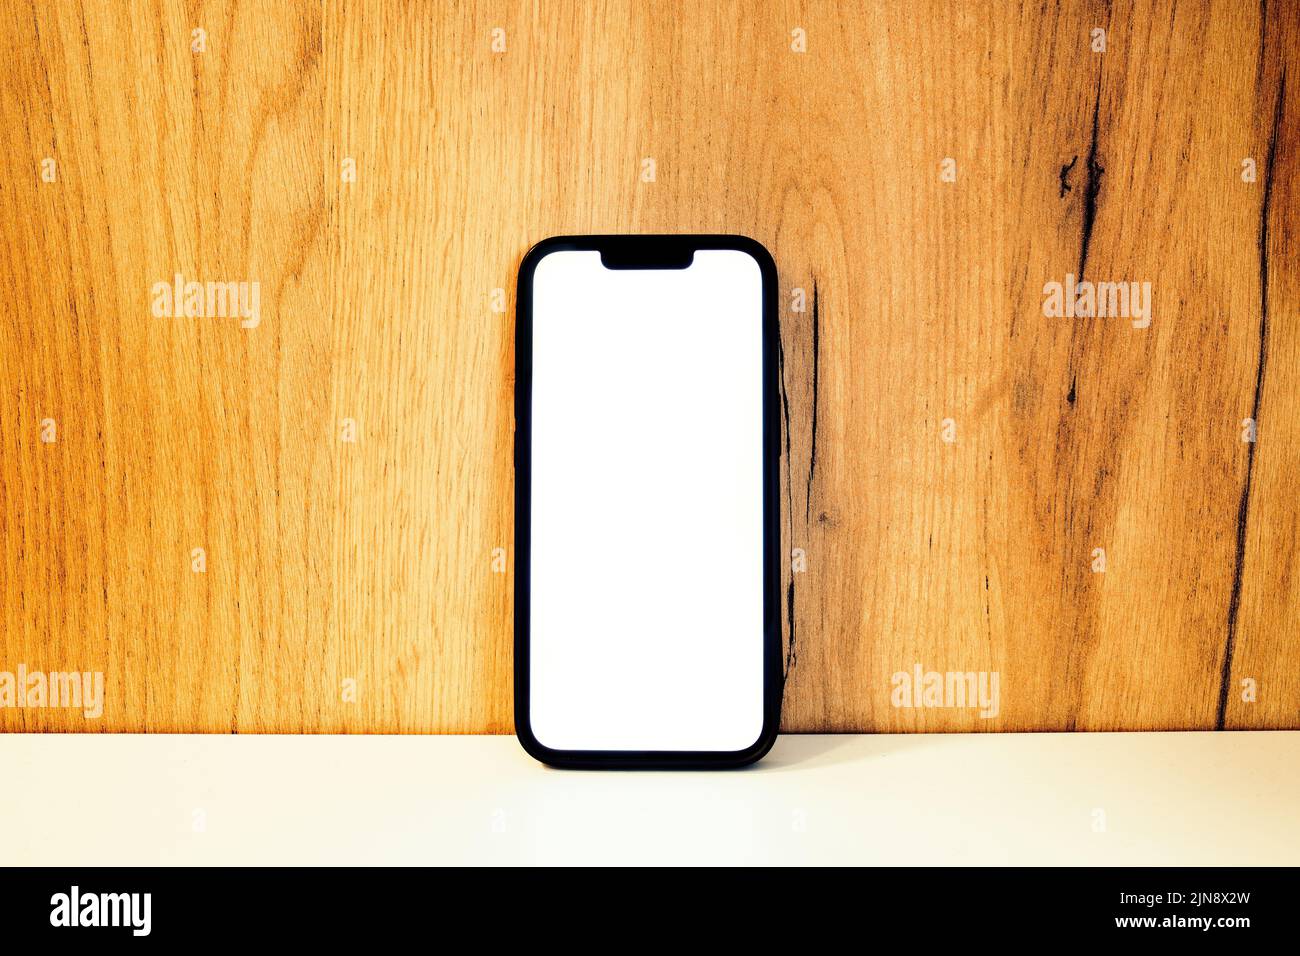 Smartphone mockup, mobile phone with blank screen on wooden shelf, copy space included Stock Photo